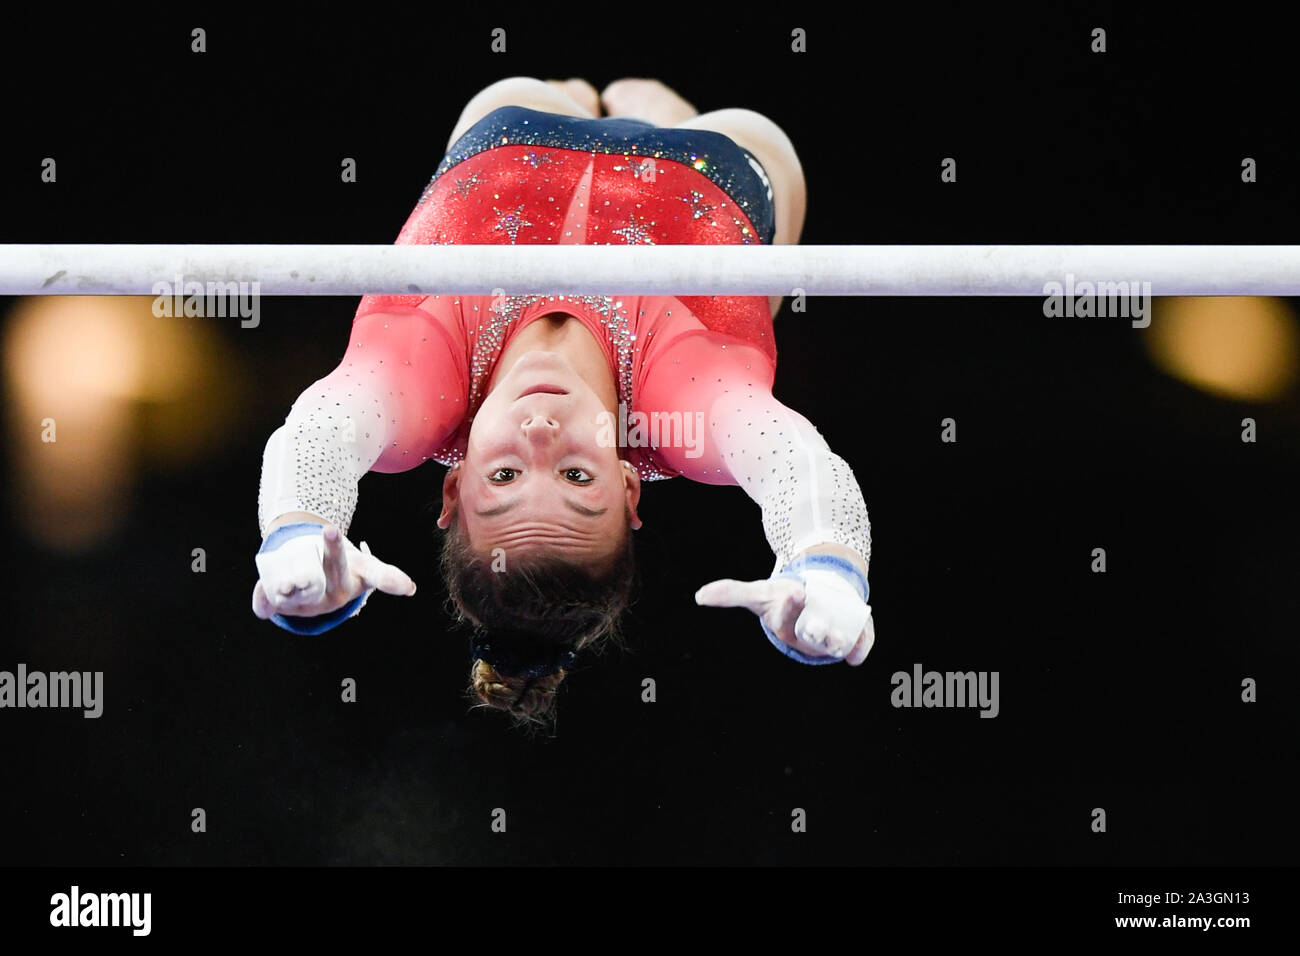 Stuttgart, Germany. 08th Oct, 2019. Gymnastics: world championship, decision final of the best eight teams, women. Grace Mc Callum from the USA on uneven bars. Credit: Tom Weller/dpa/Alamy Live News Stock Photo